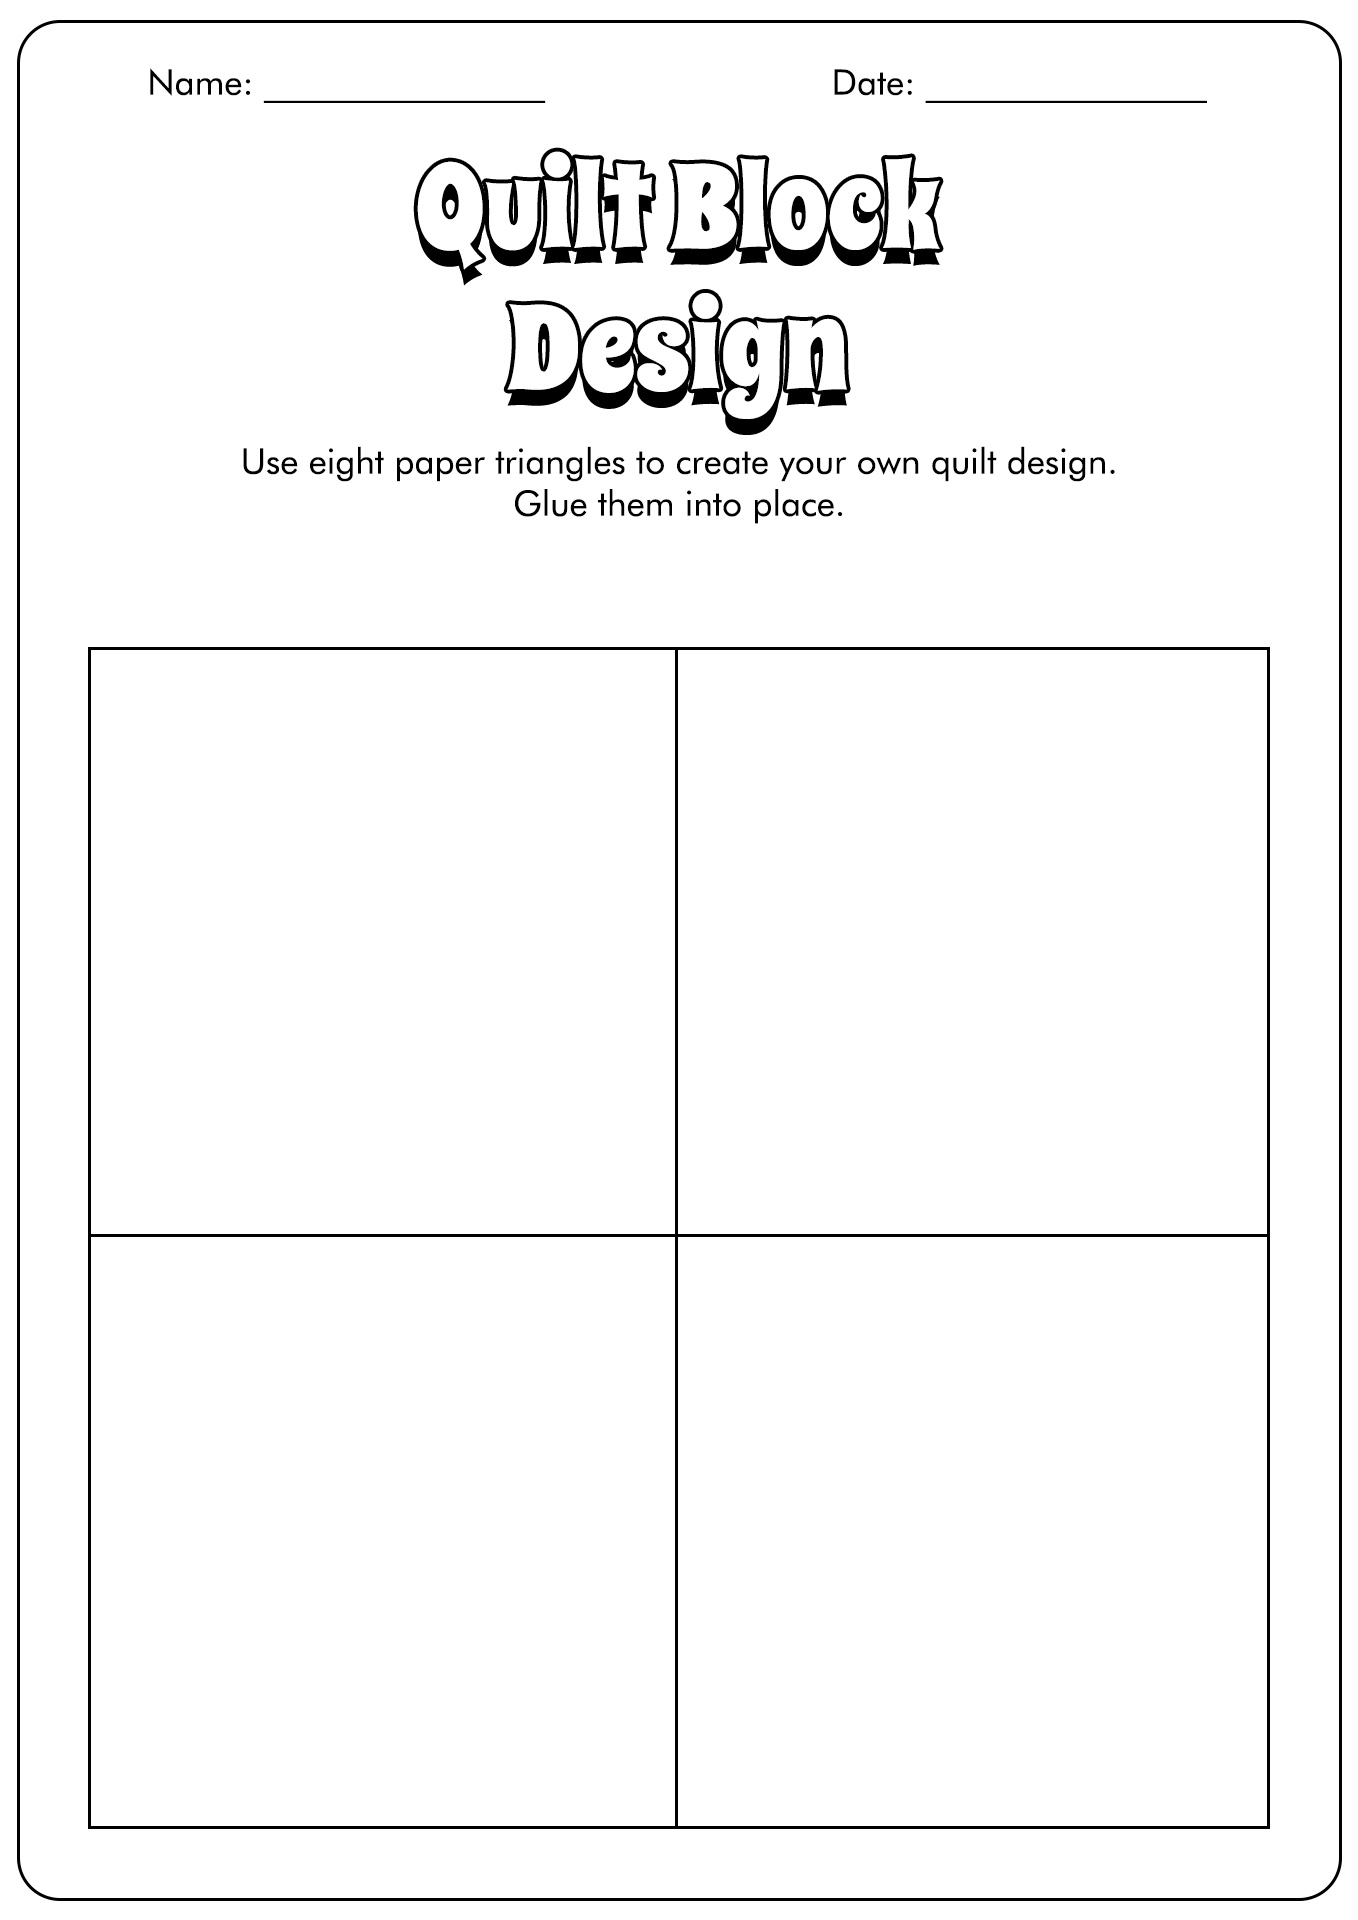 13 Best Images of Blank Quilt Worksheet Blank Quilt Square Template